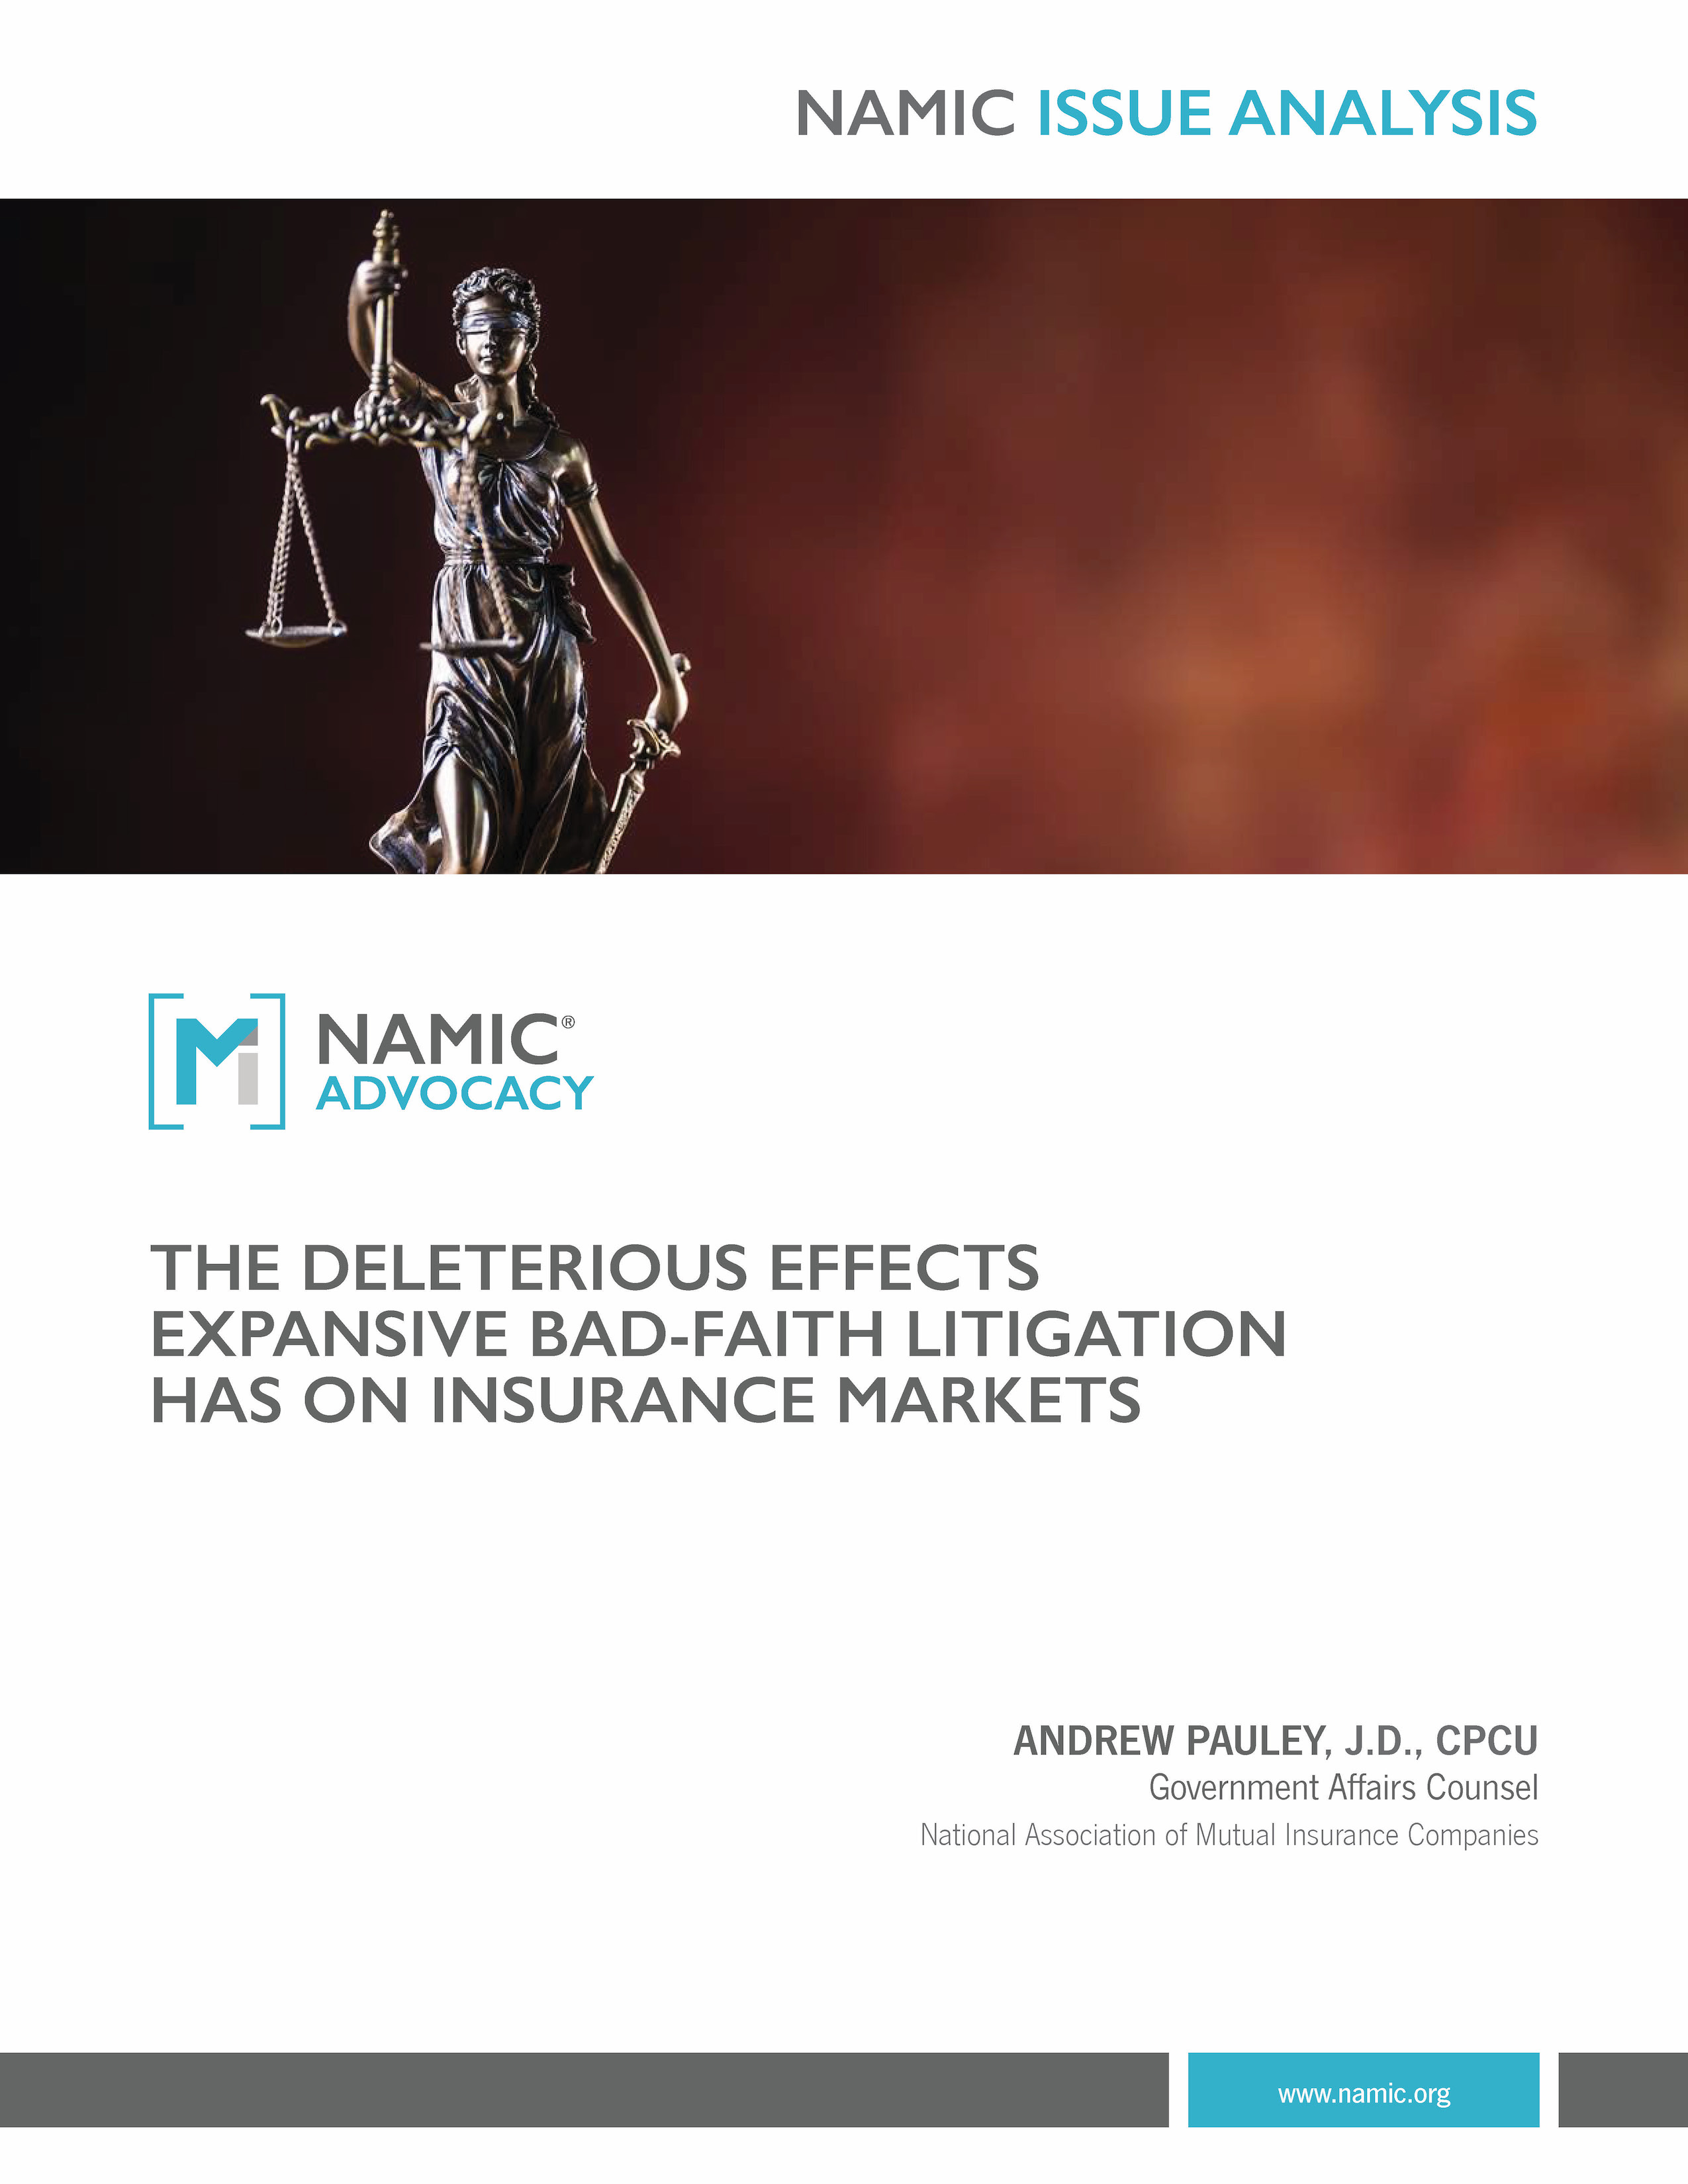 The Deleterious Effects Expansive Bad-Faith Litigation Has on Insurance Markets PDF